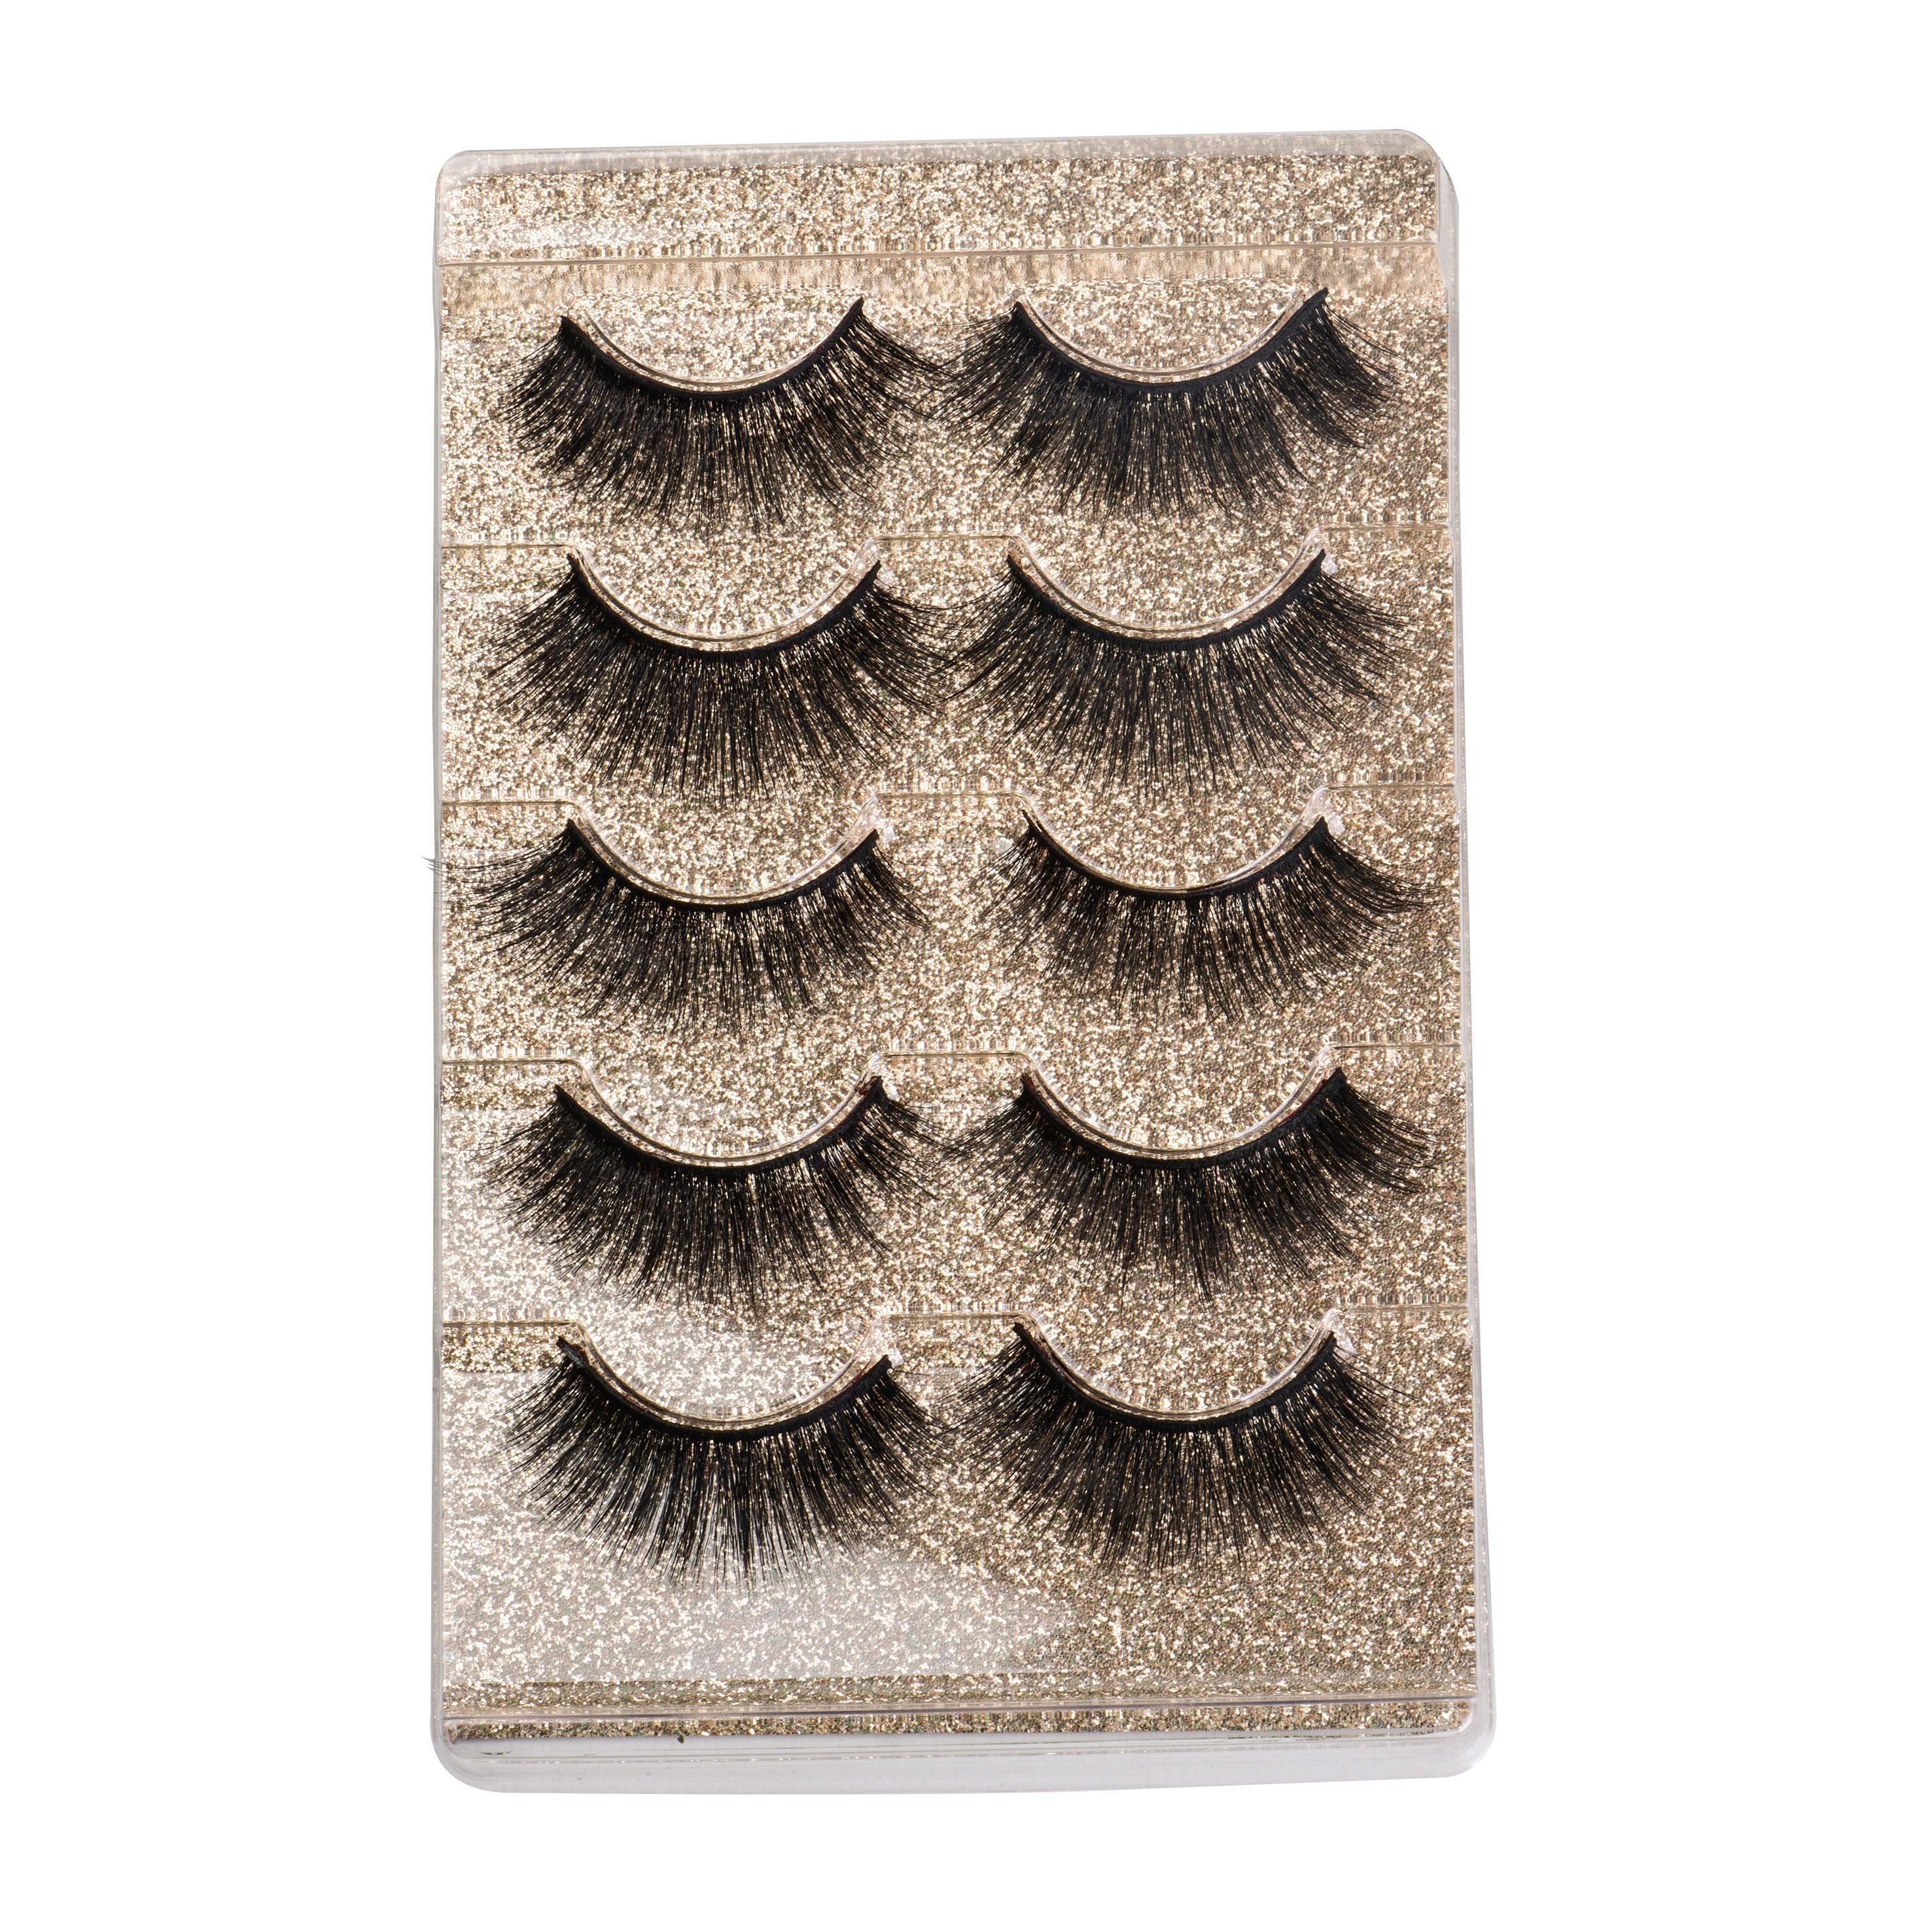 5 Pairs Majestic Collection Lashes #10 - Miss Lil USA